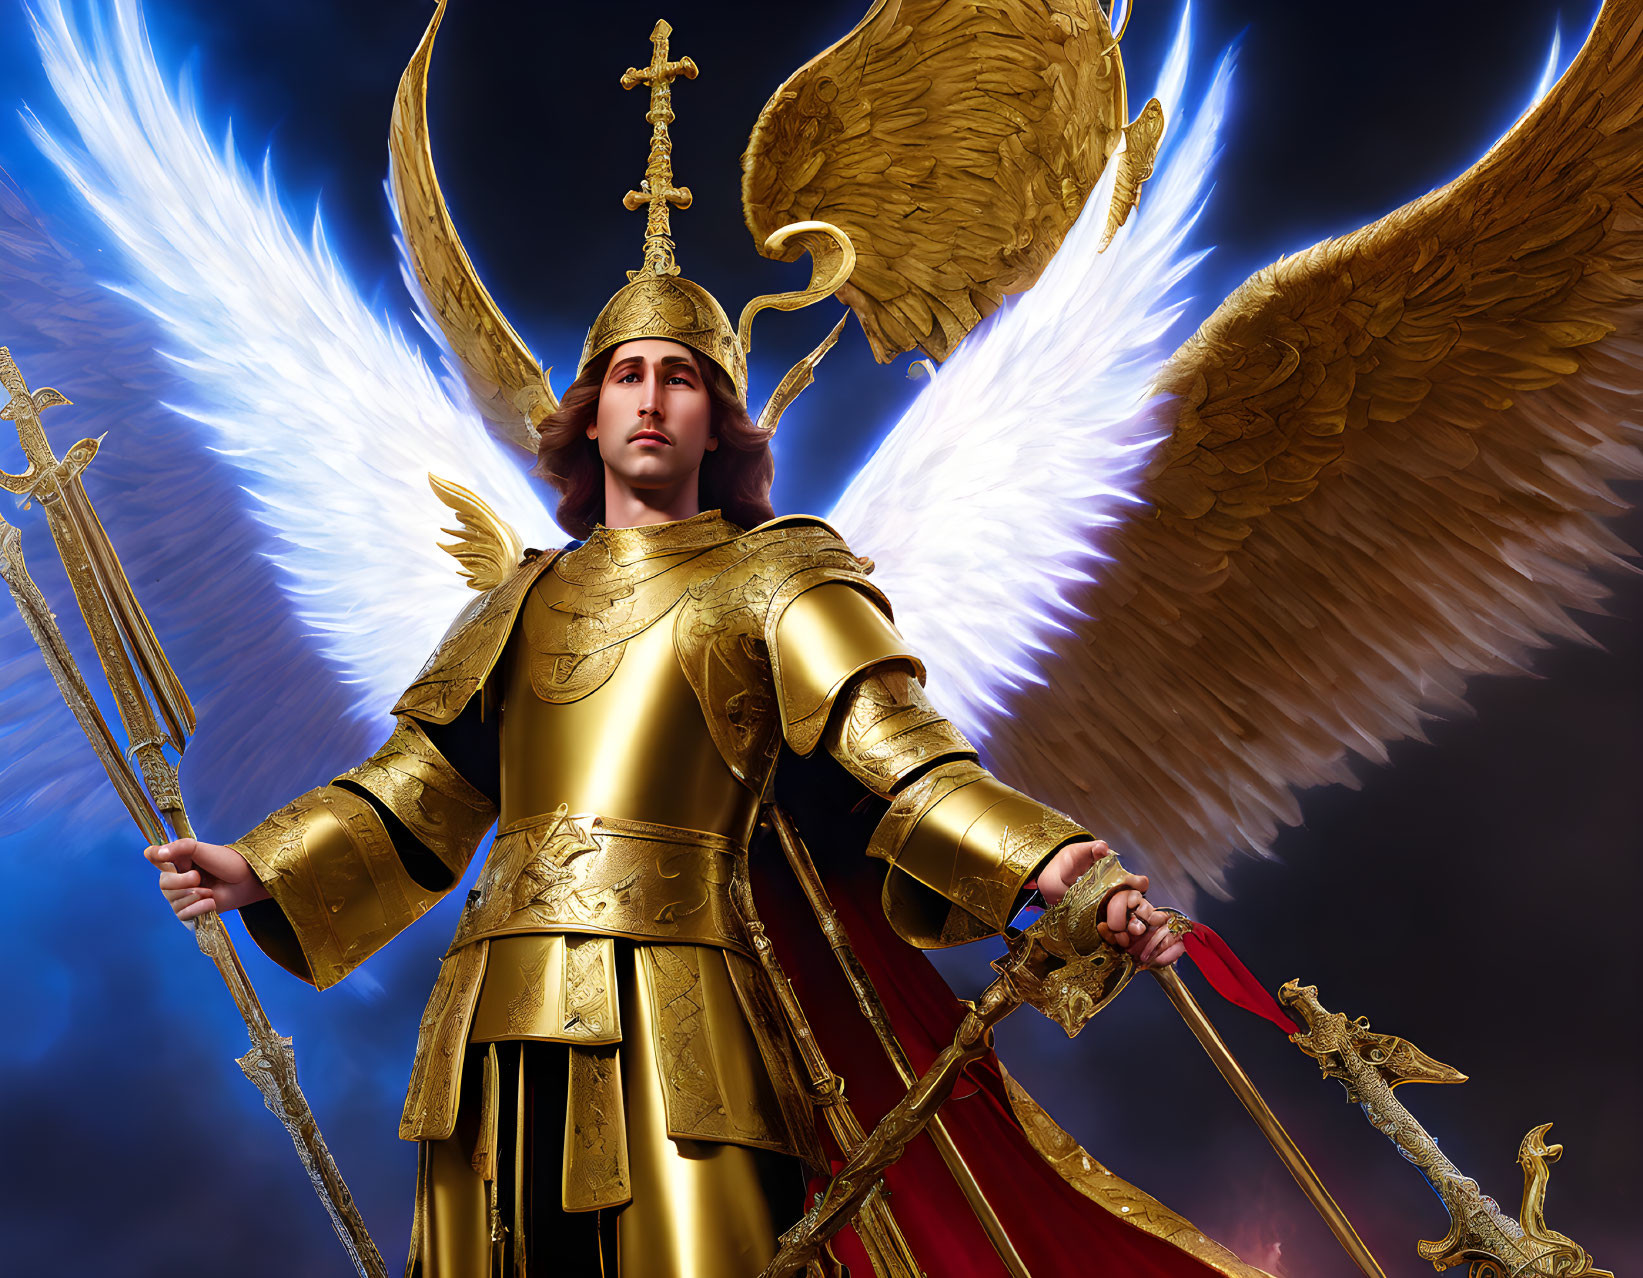 Golden-armored angel with wings, scepter, and sword against dramatic sky.